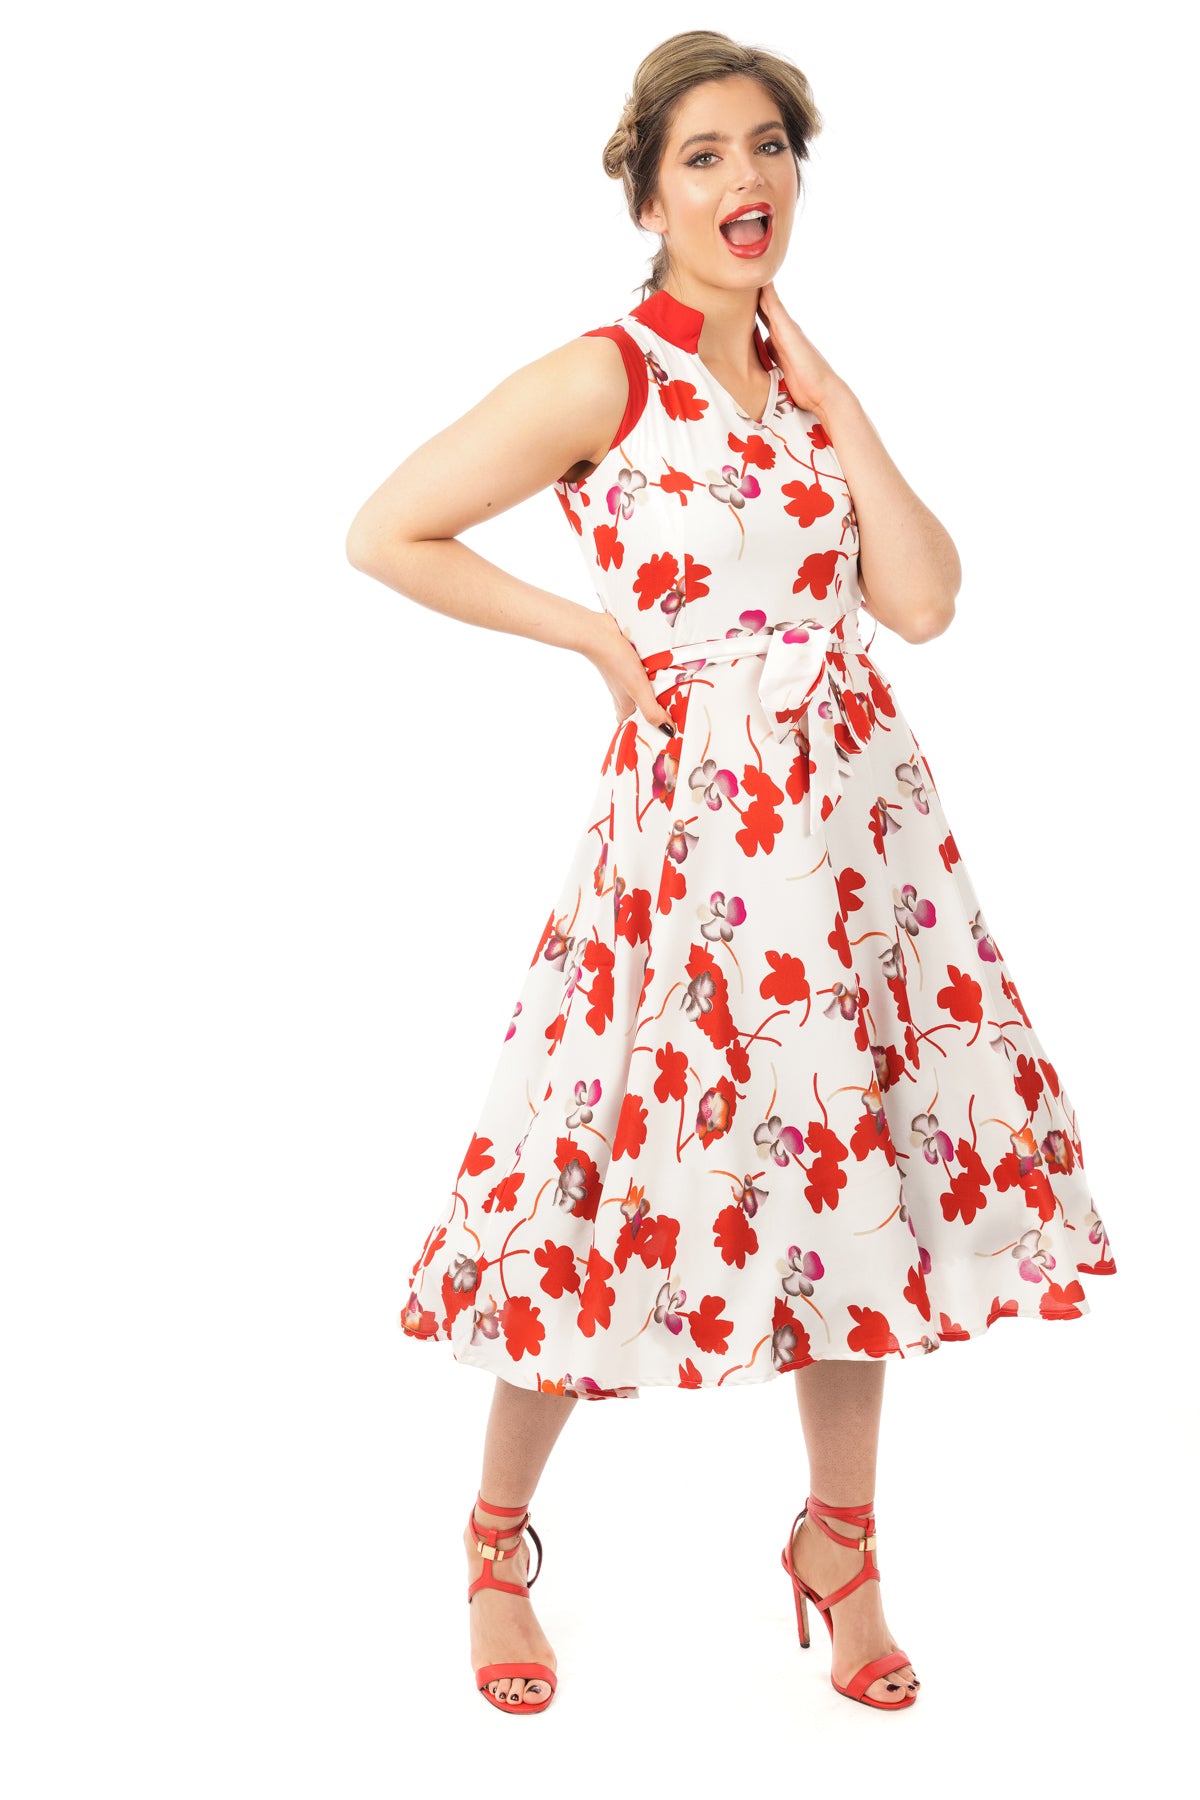 Retro Vintage inspired 1950's Midi Floral Dress - Pack of 10